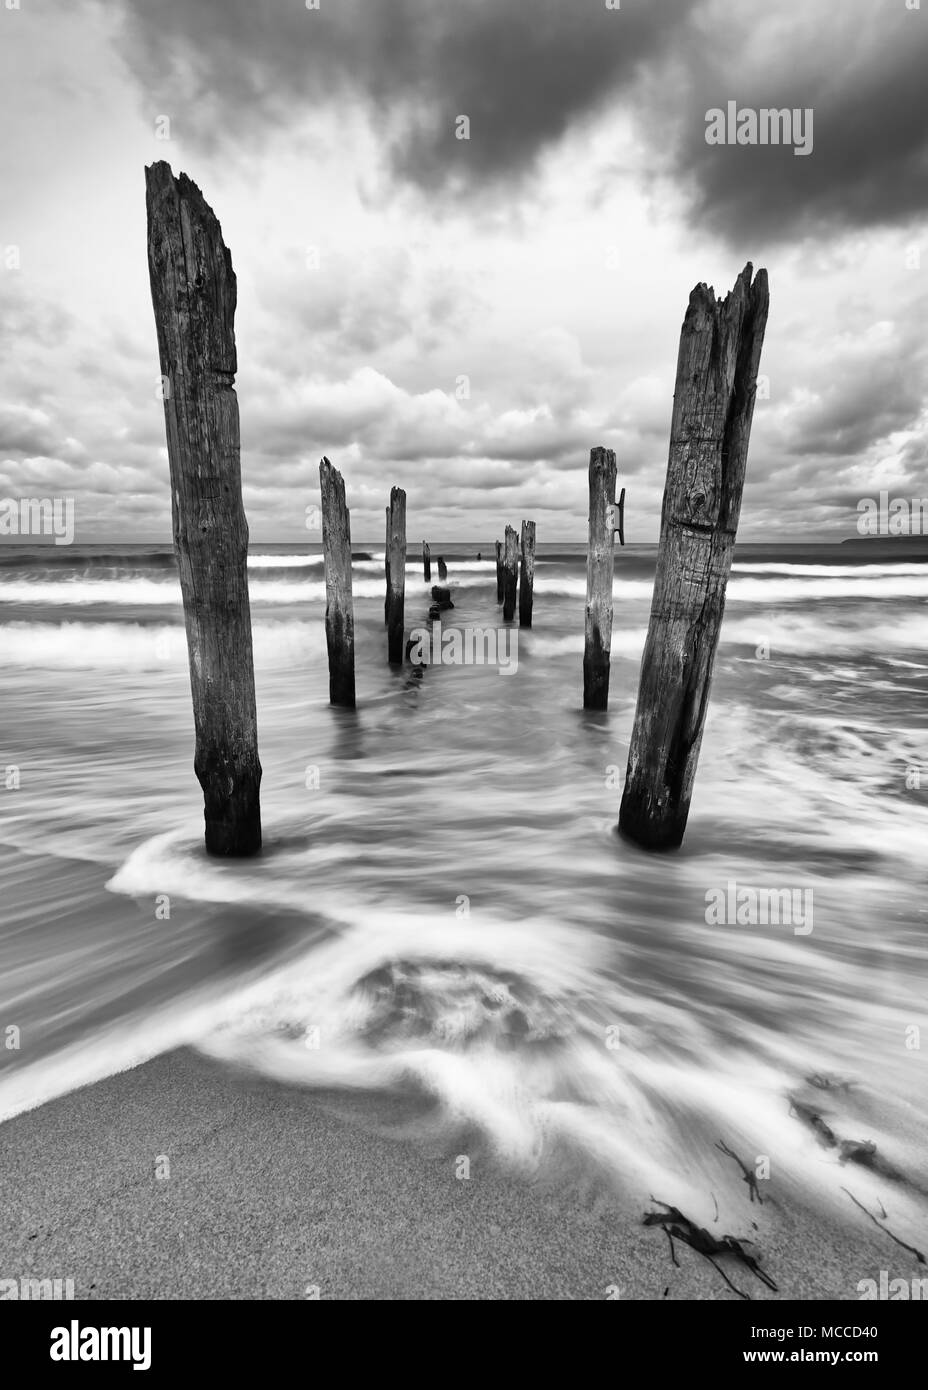 Scenic view of wooden poles on a beach, the movement of the waves is shown in addition to a colorful evening sky, black and white version Stock Photo